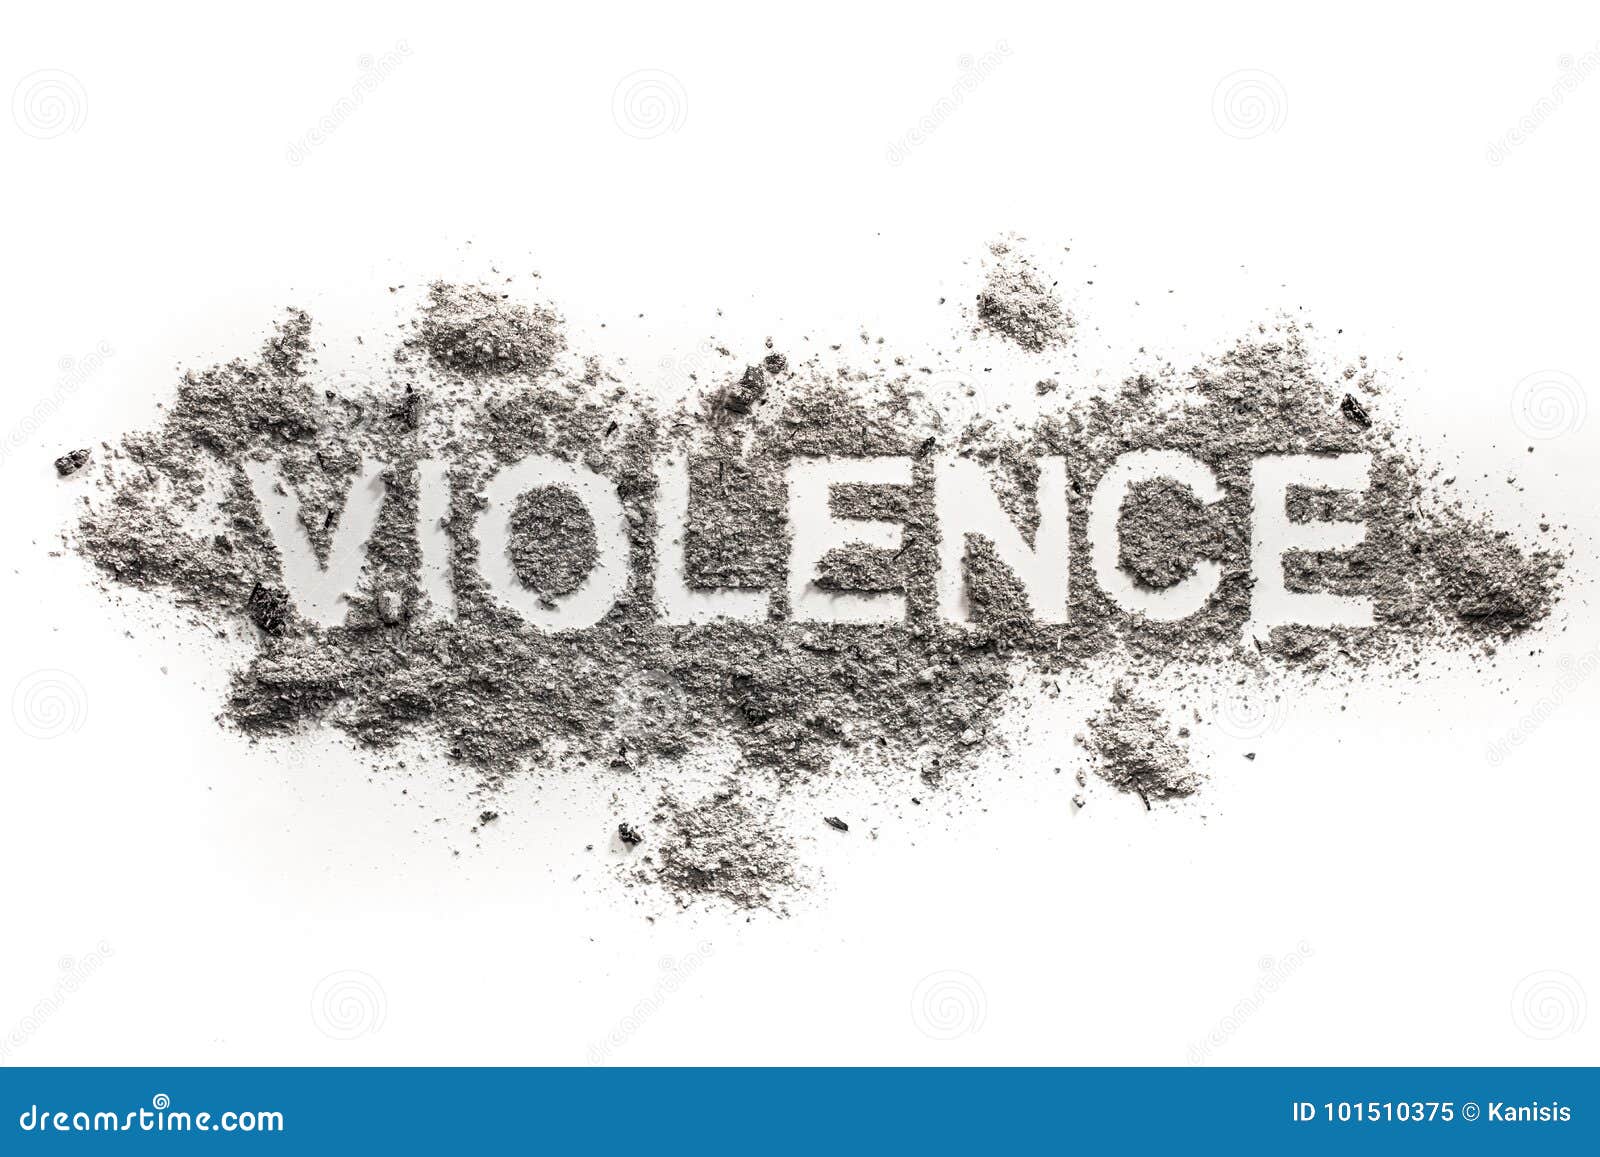 violence word as psychological, physical or emotional aggression